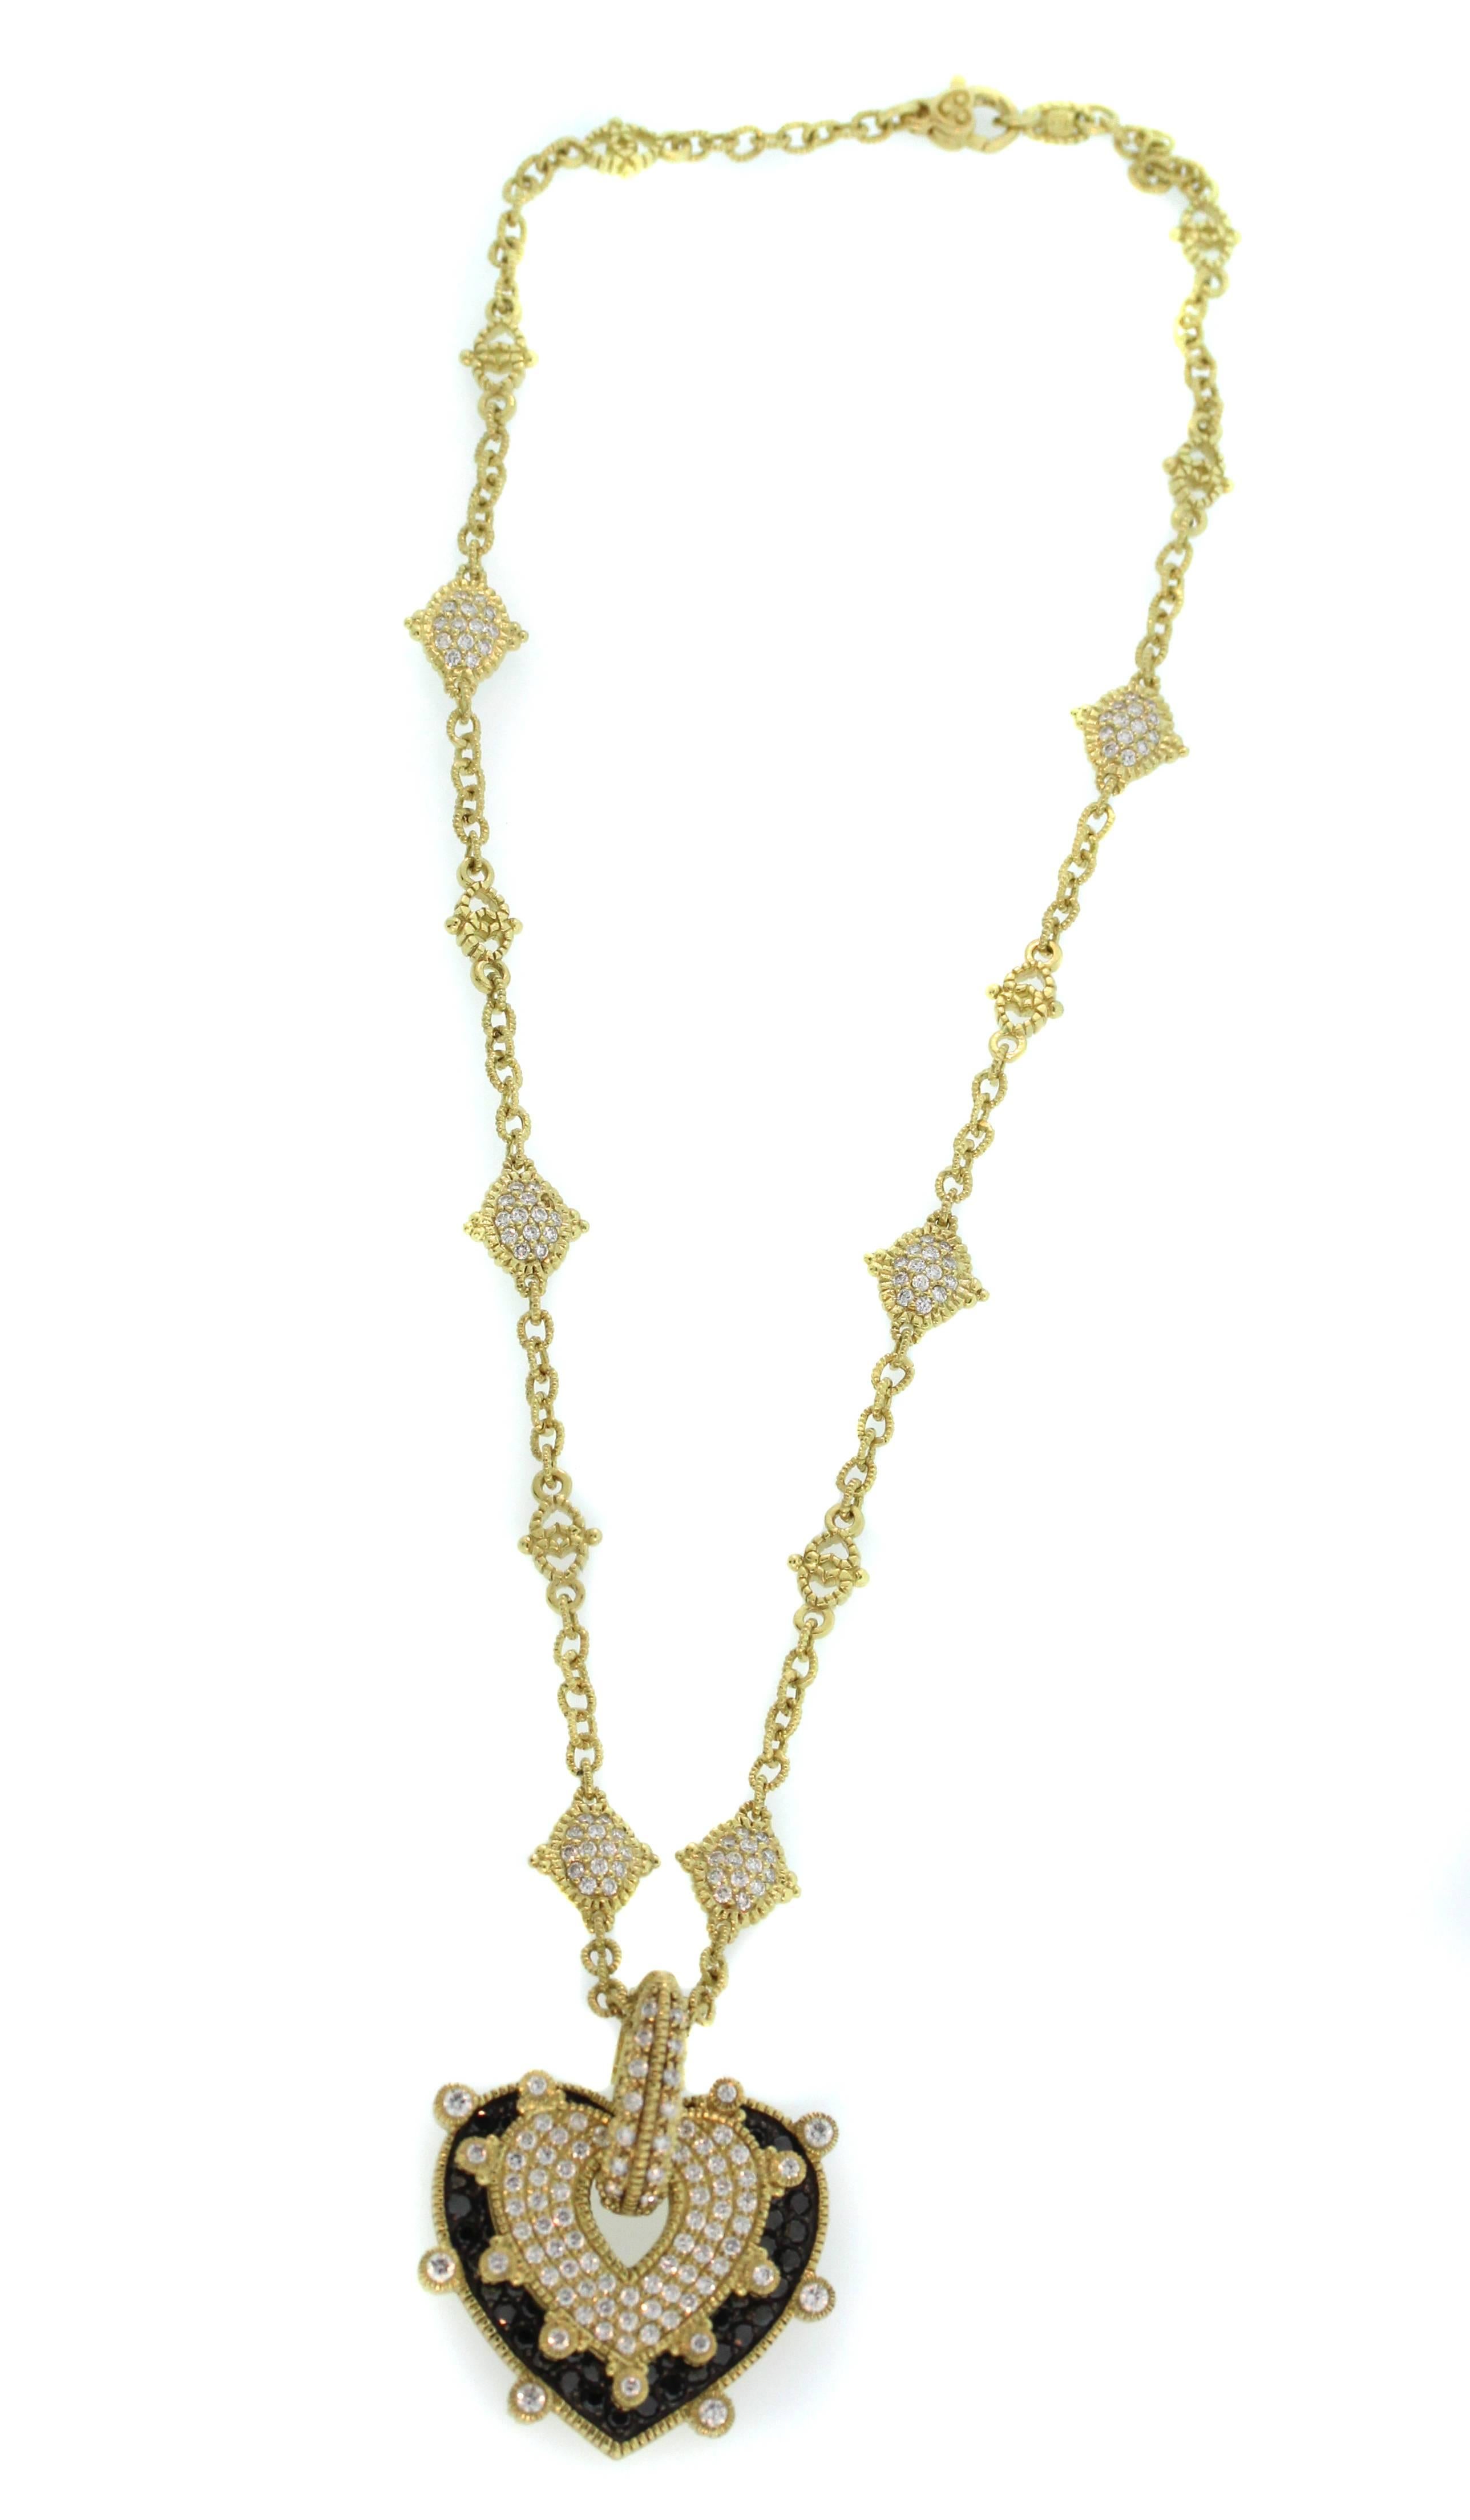 Judith Ripka

18K Gold Chain Necklace with Two-Piece, Black and White Diamond Pendant Enhancer. 

The Heart Pendant enhancer is two pieces. The black diamond layer is bottom portion, and the white diamond heart is a separate piece. Either can be